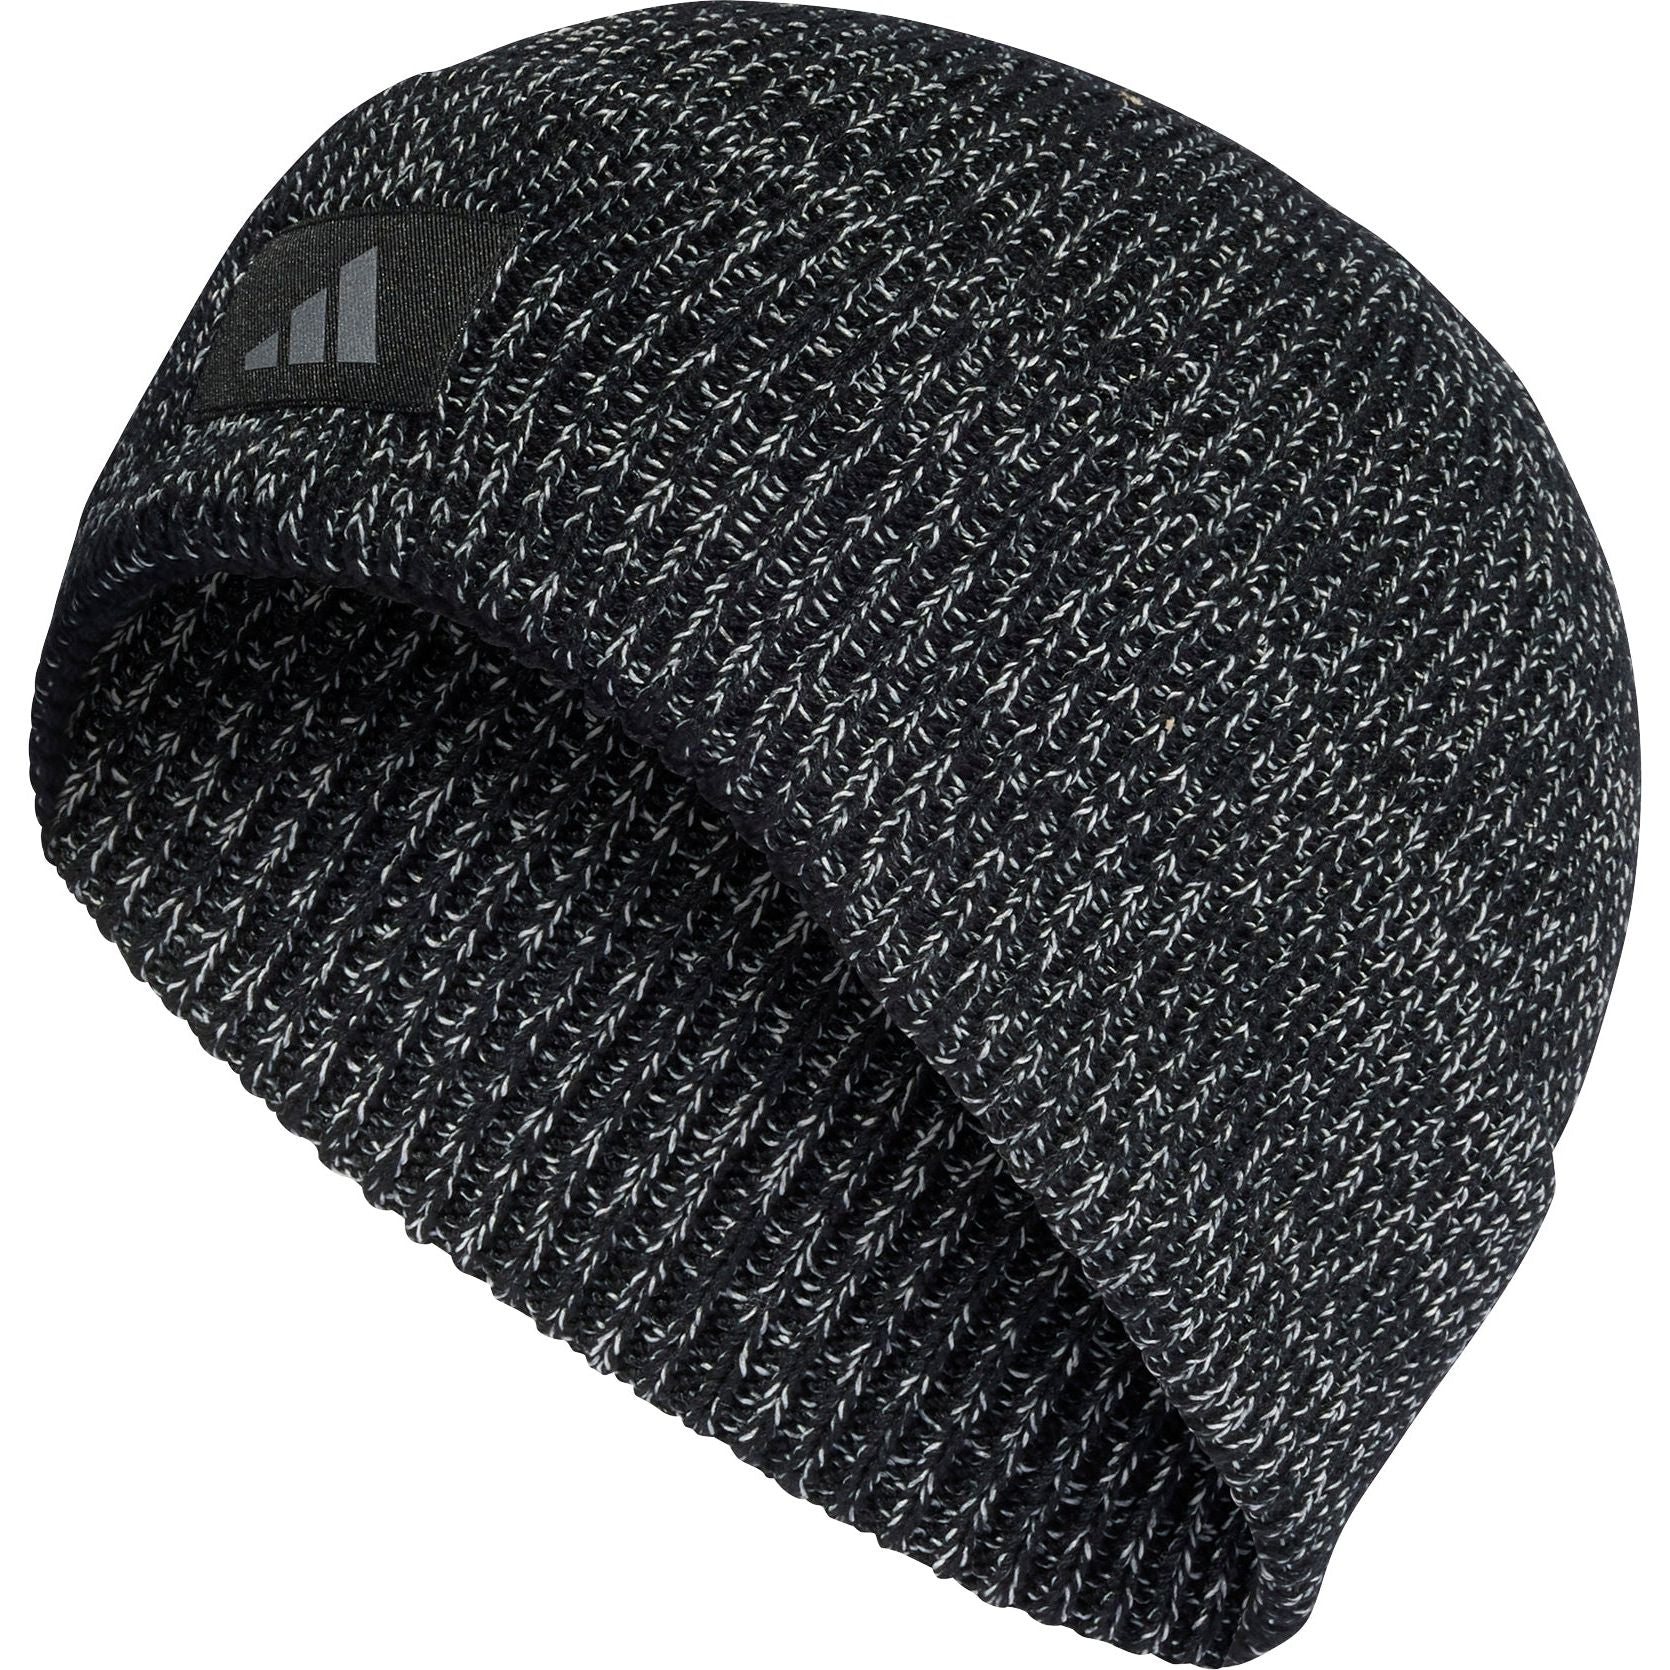 Adidas Cold Rdy Reflective Beanie Hy0671